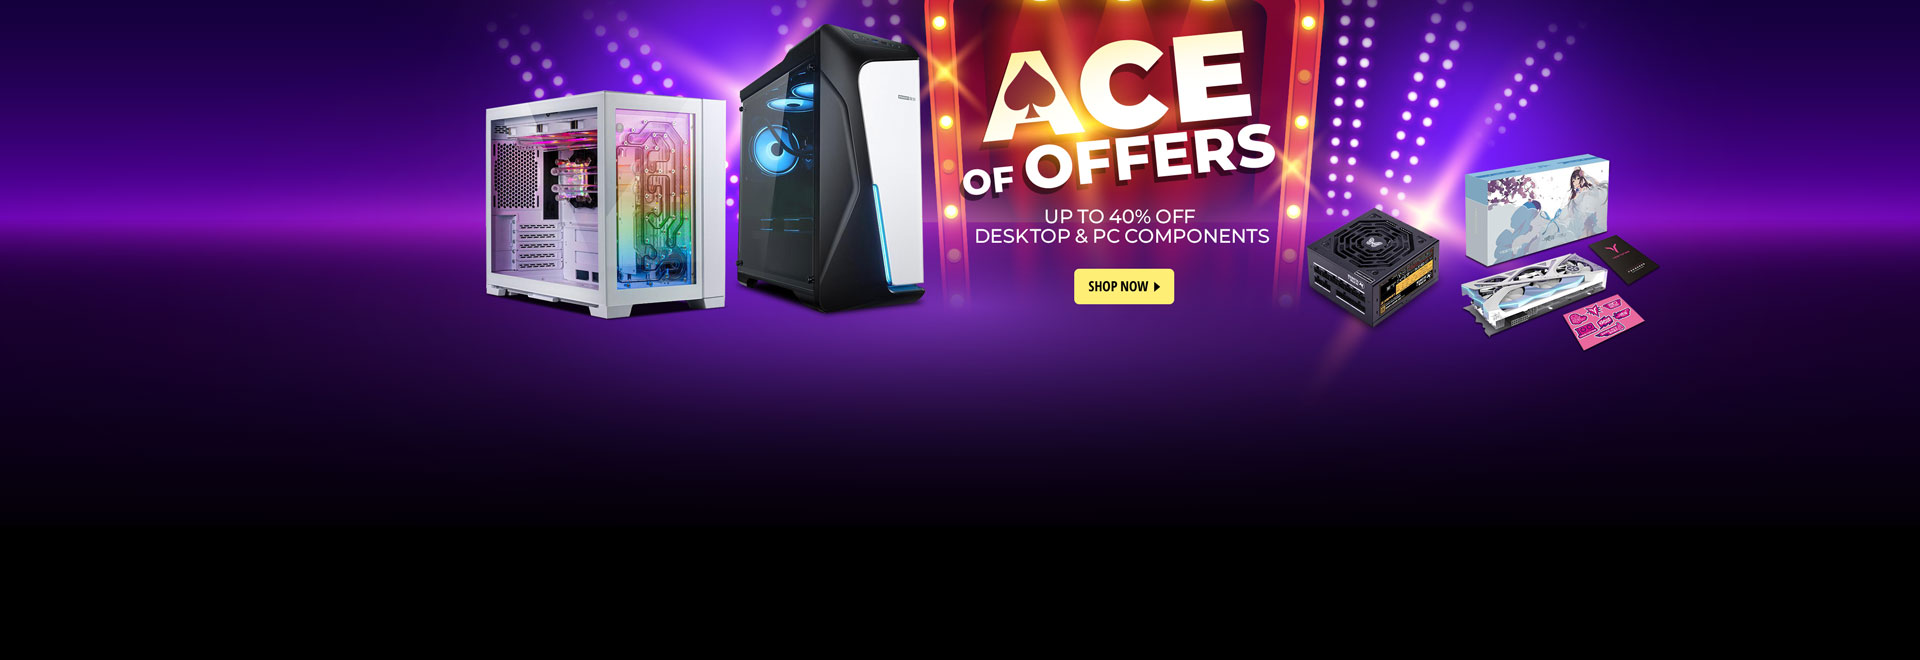 ACE OF OFFERS